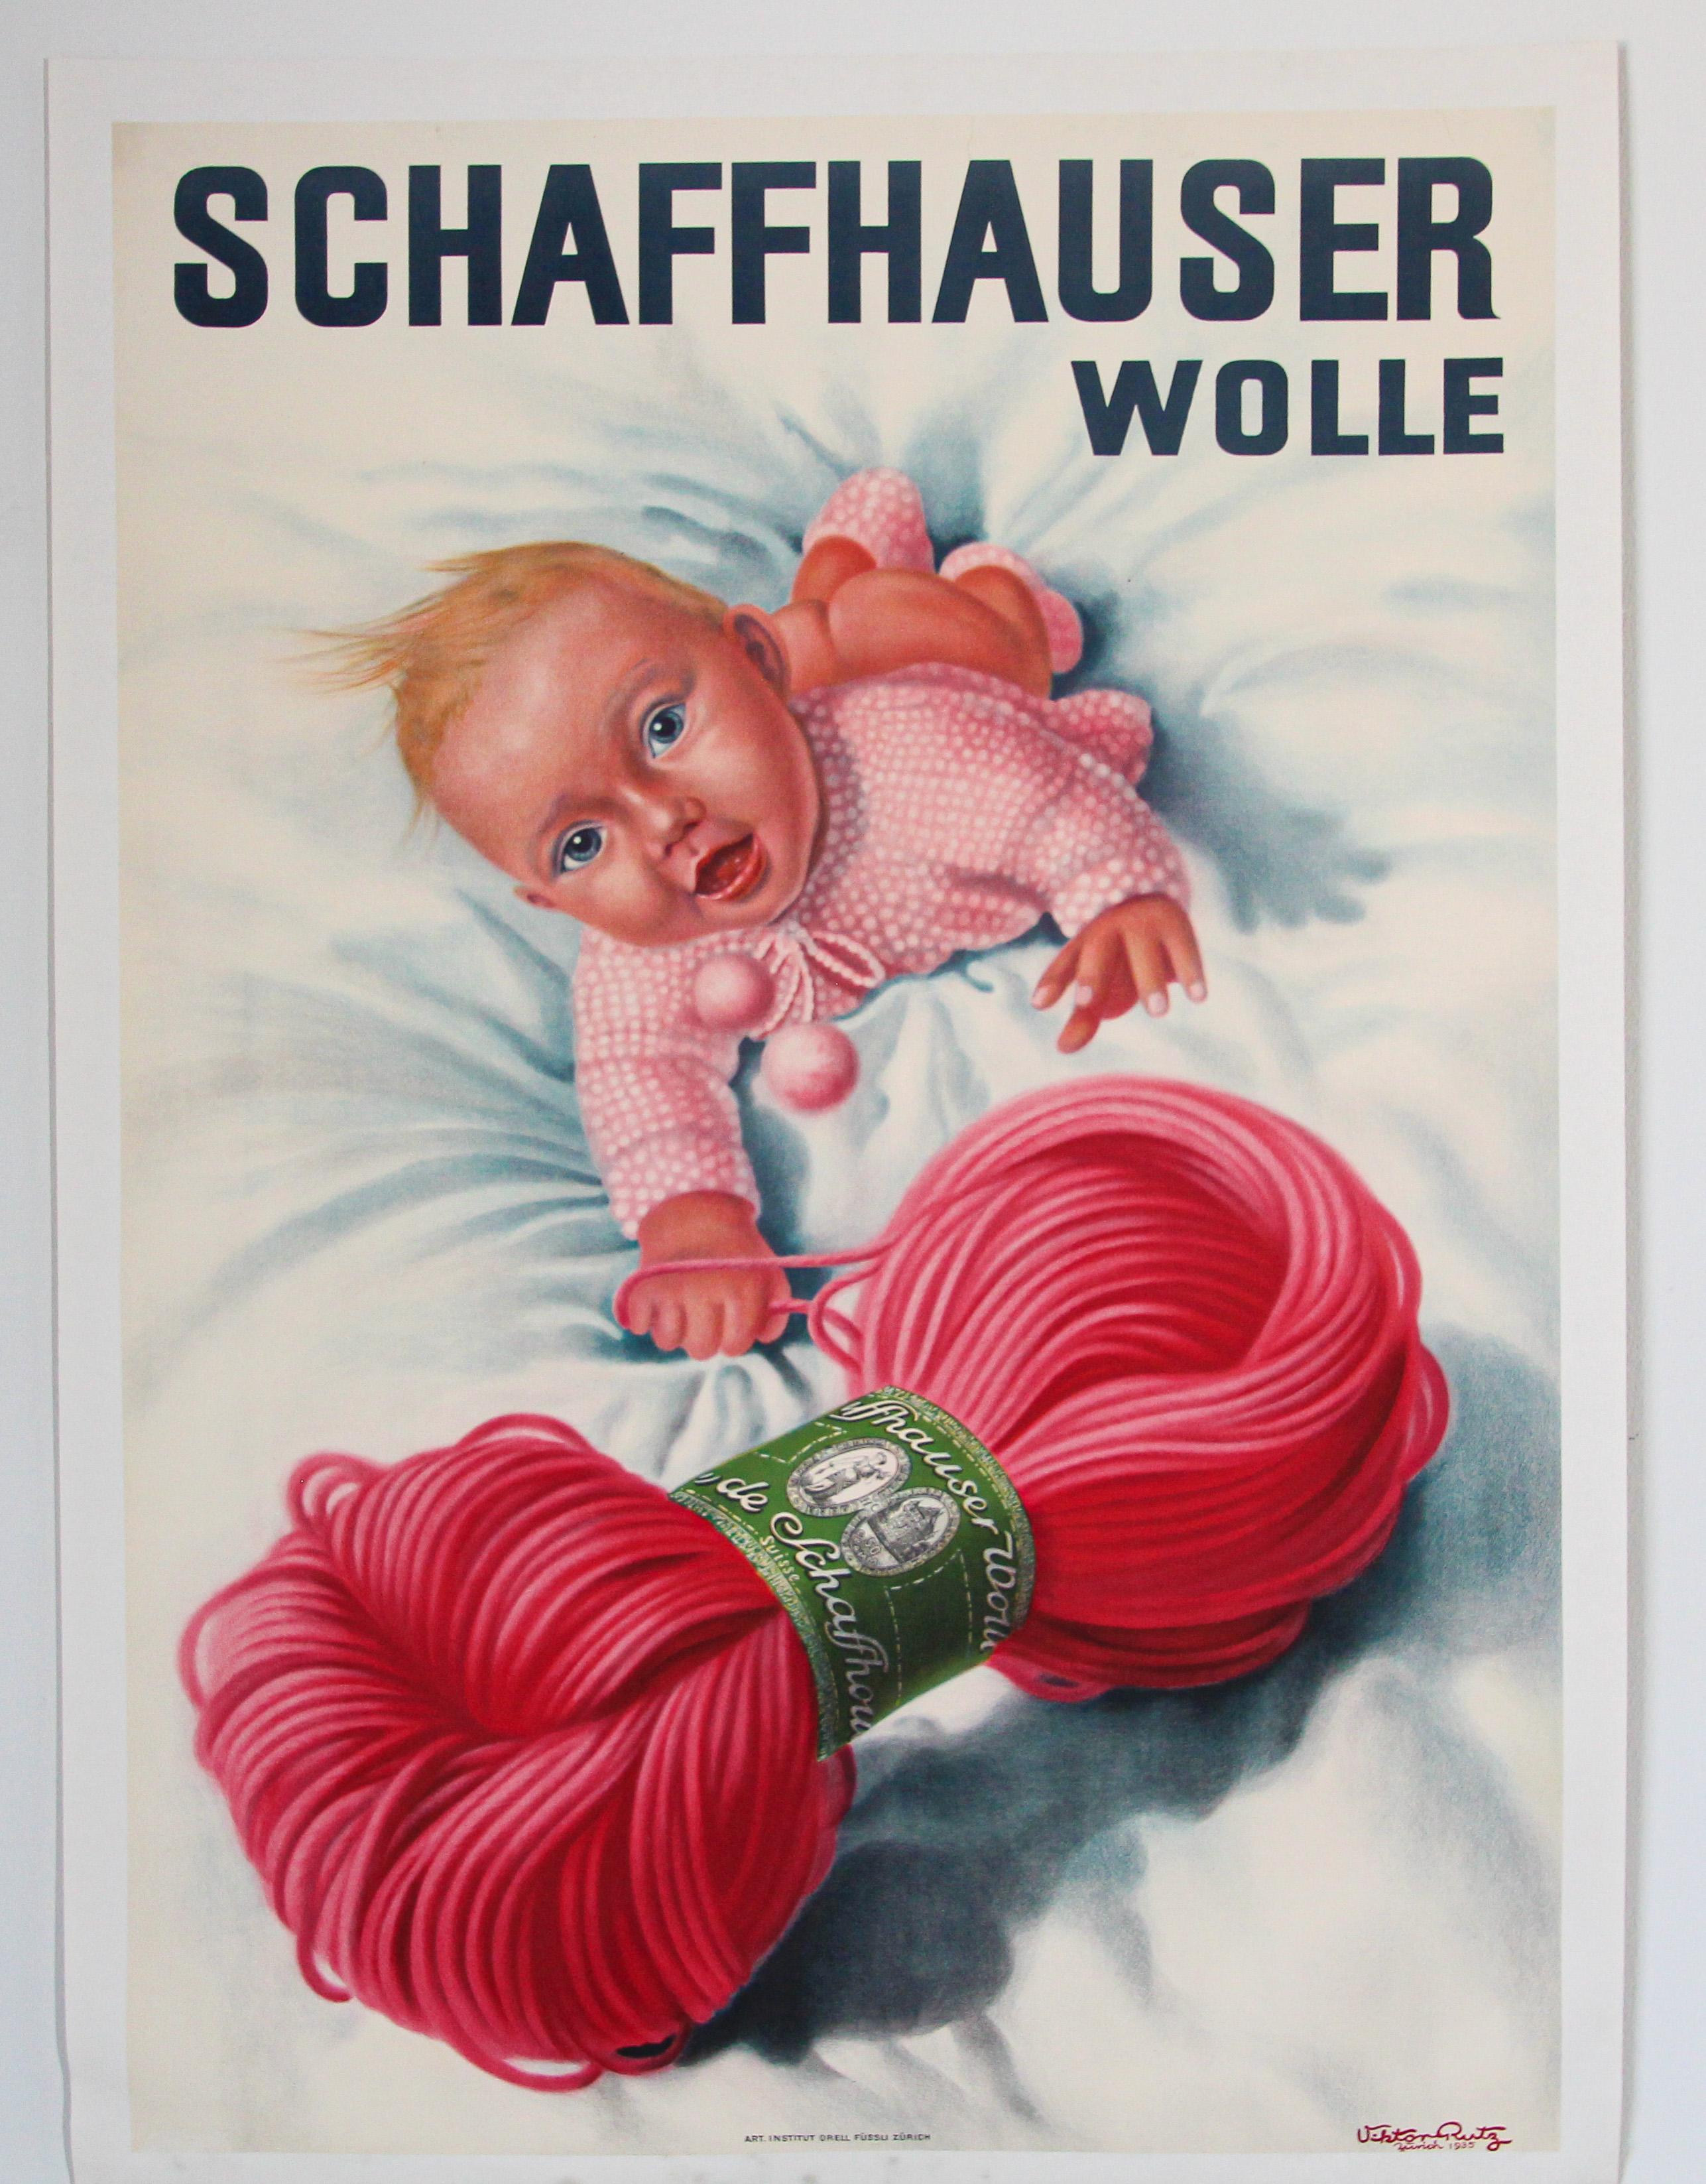 Original vintage poster Swiss Schaffhauser Wolle Wool Yarn Knitting 1935 Baby.
This is an original 1st printing of this poster by Viktor Rutz Zurich .
Printed in 1935, it was created to advertise Schaffhauser Wolle.
Advertising poster for yarn